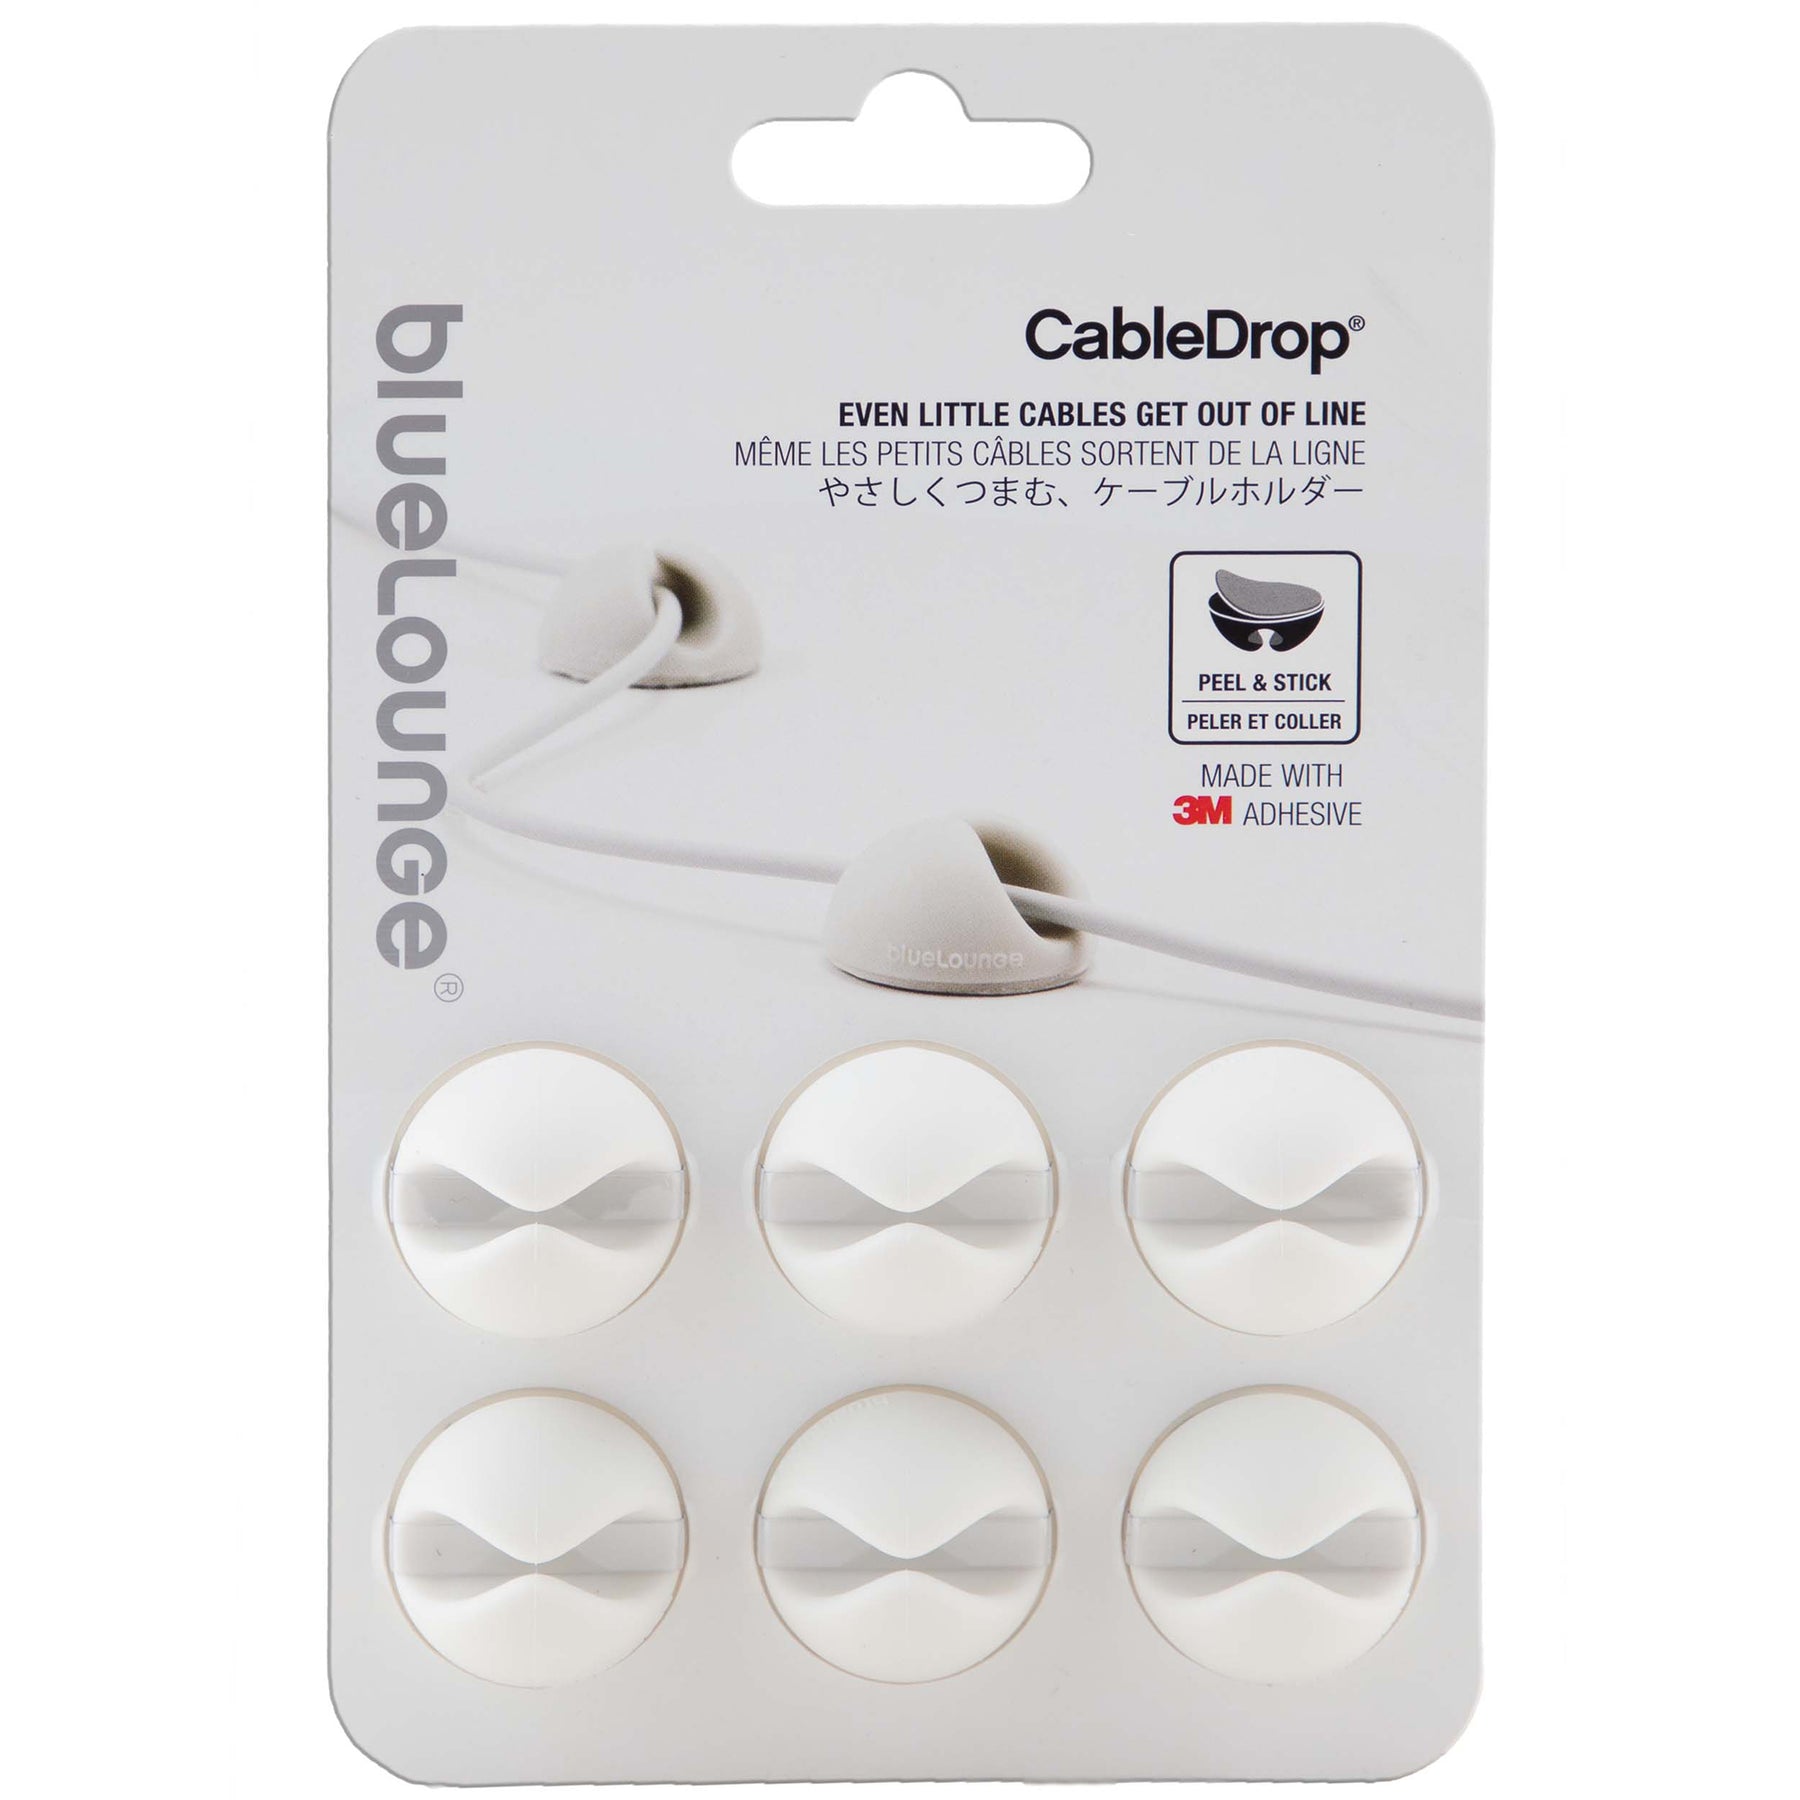 Cable Organizer Cord Holder Drop Clips Management Adhesive Manager Phone  Mini Clip for Wire Sticky cabledrop Wall Stopper Keeper Table sorter  Multipurpose Catch Desk Suction Cup - Pack of 26 White 